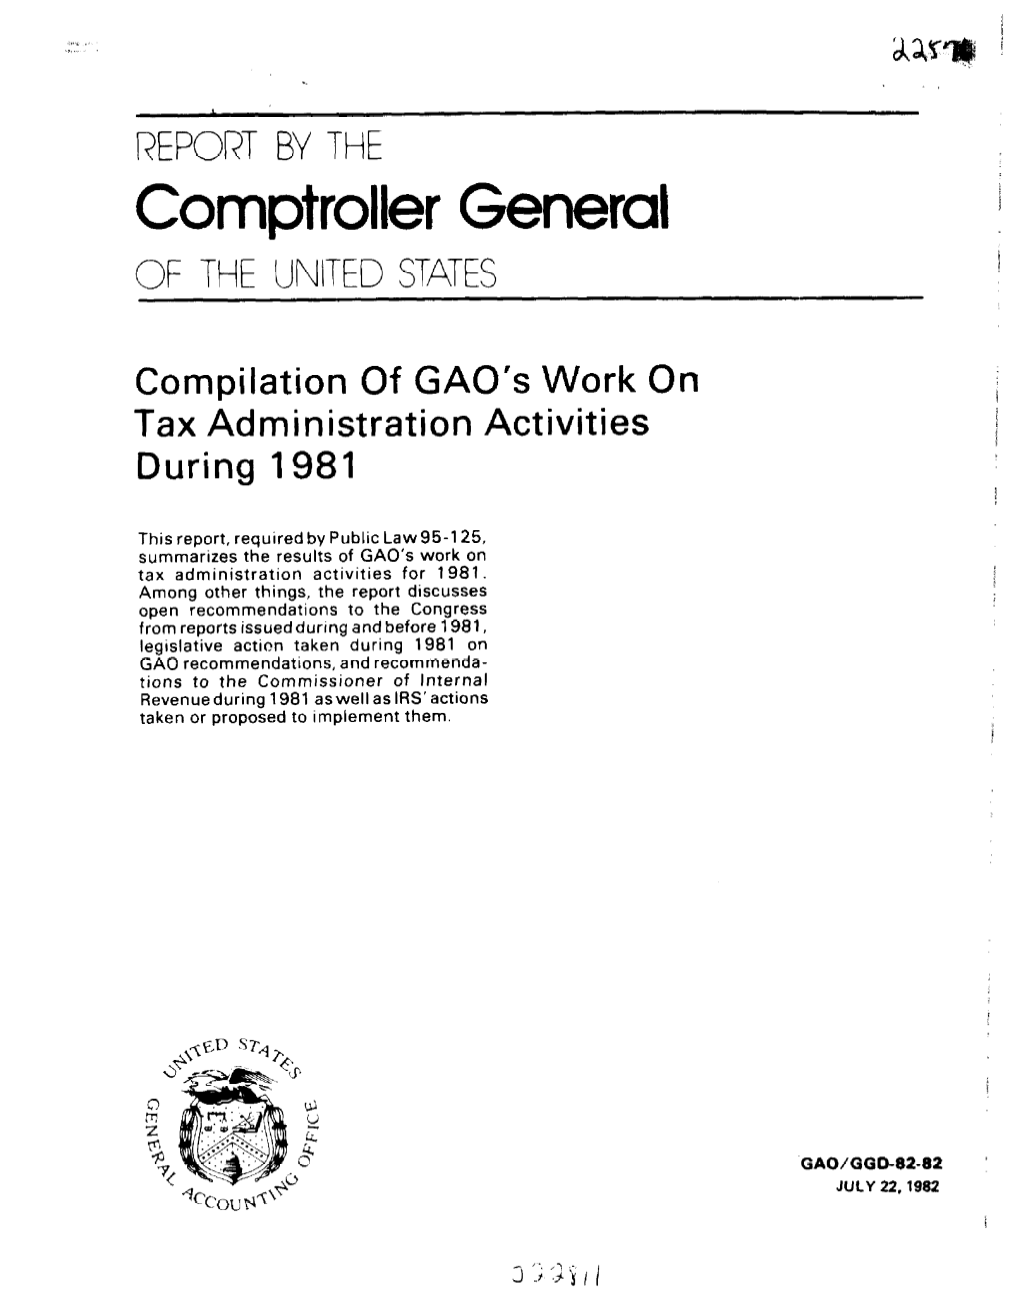 GGD-82-82 Compilation of GAO Work on Tax Administration Activities During 1981